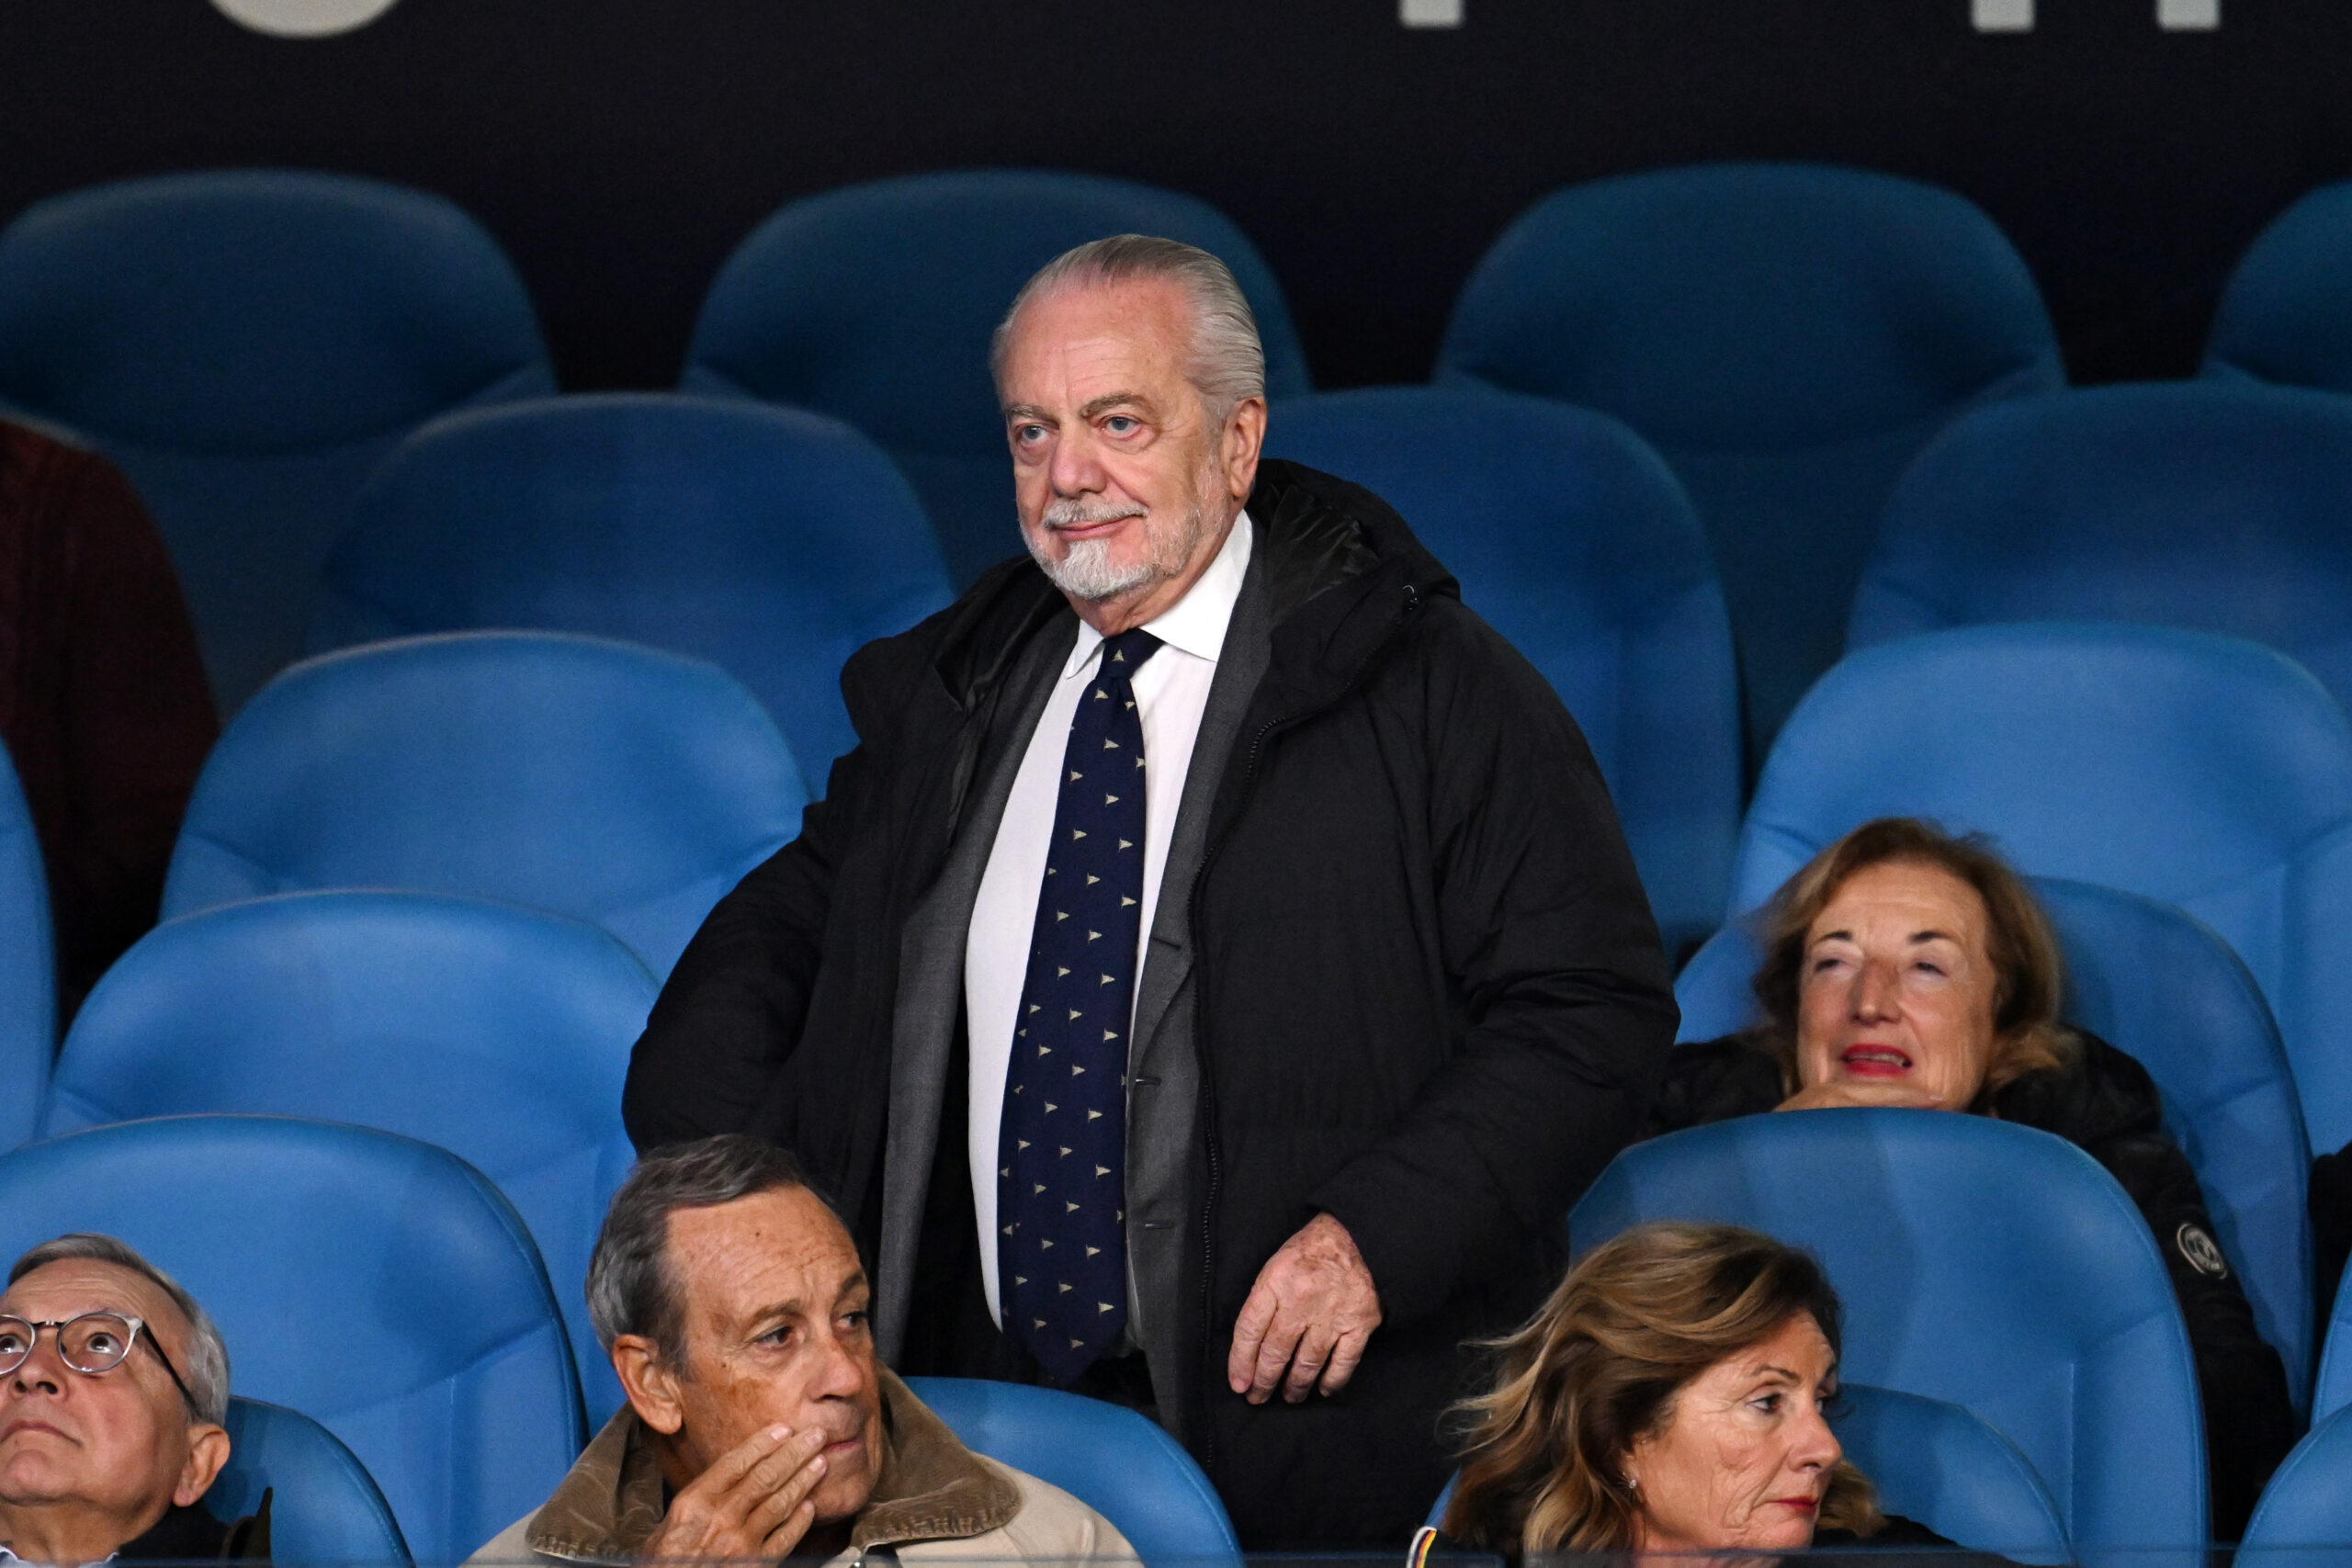 Napoli president Aurelio De Laurentiis wasn’t pleased with the referee’s performance in the Supercoppa but elected not to dwell in his post-game remarks